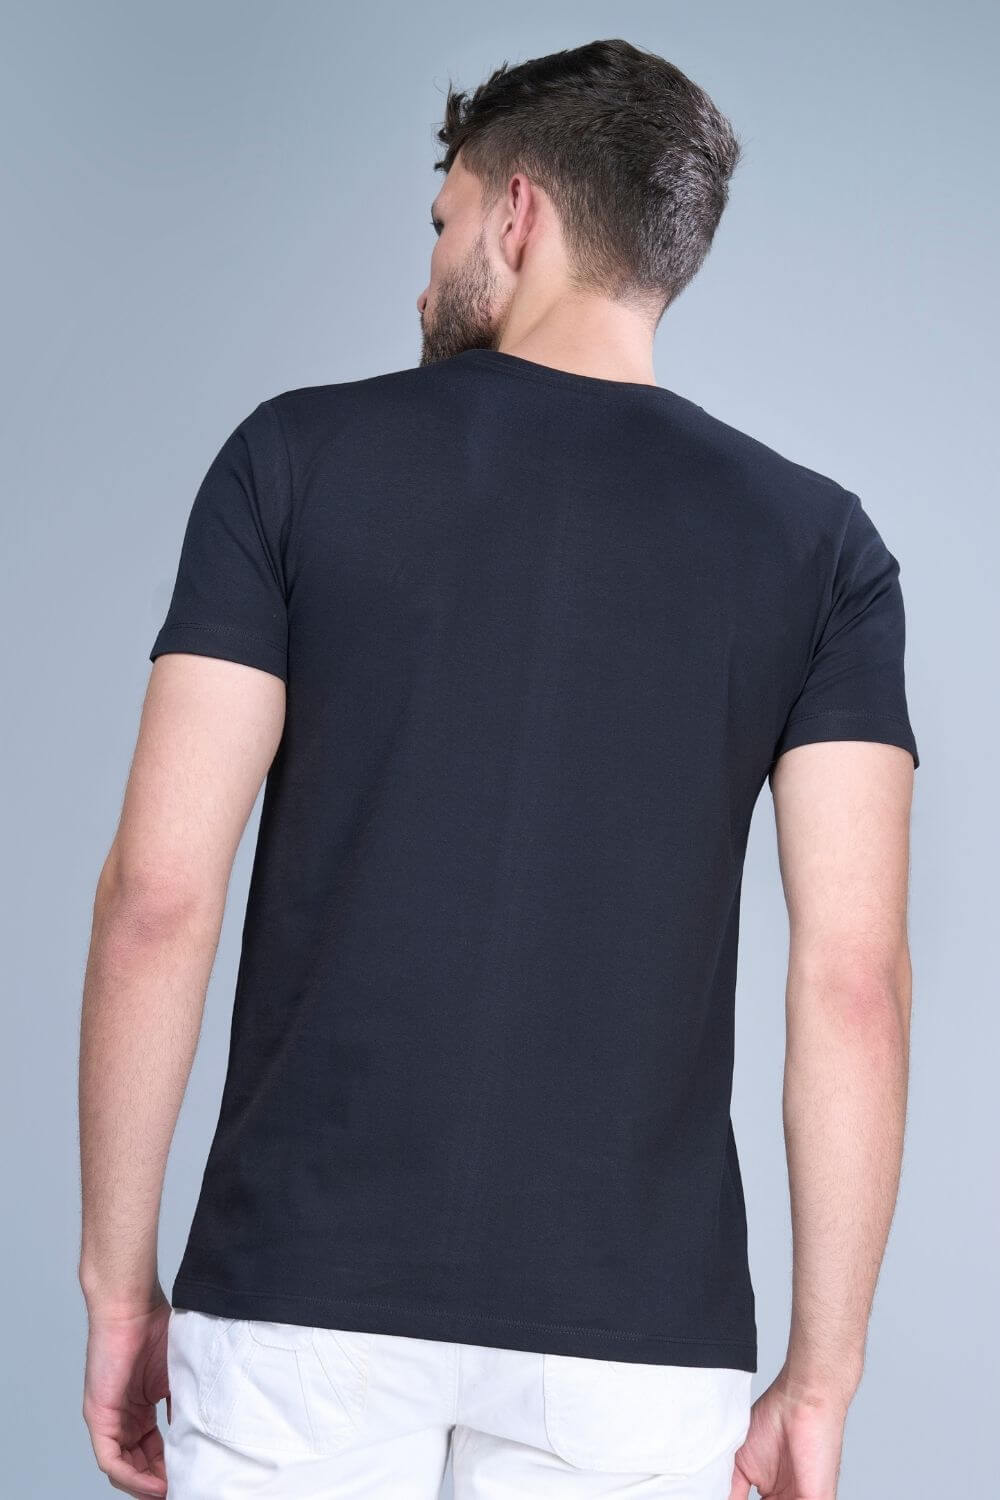 Back view of Black colored, Solid T shirt for men, with half sleeves and round neck.